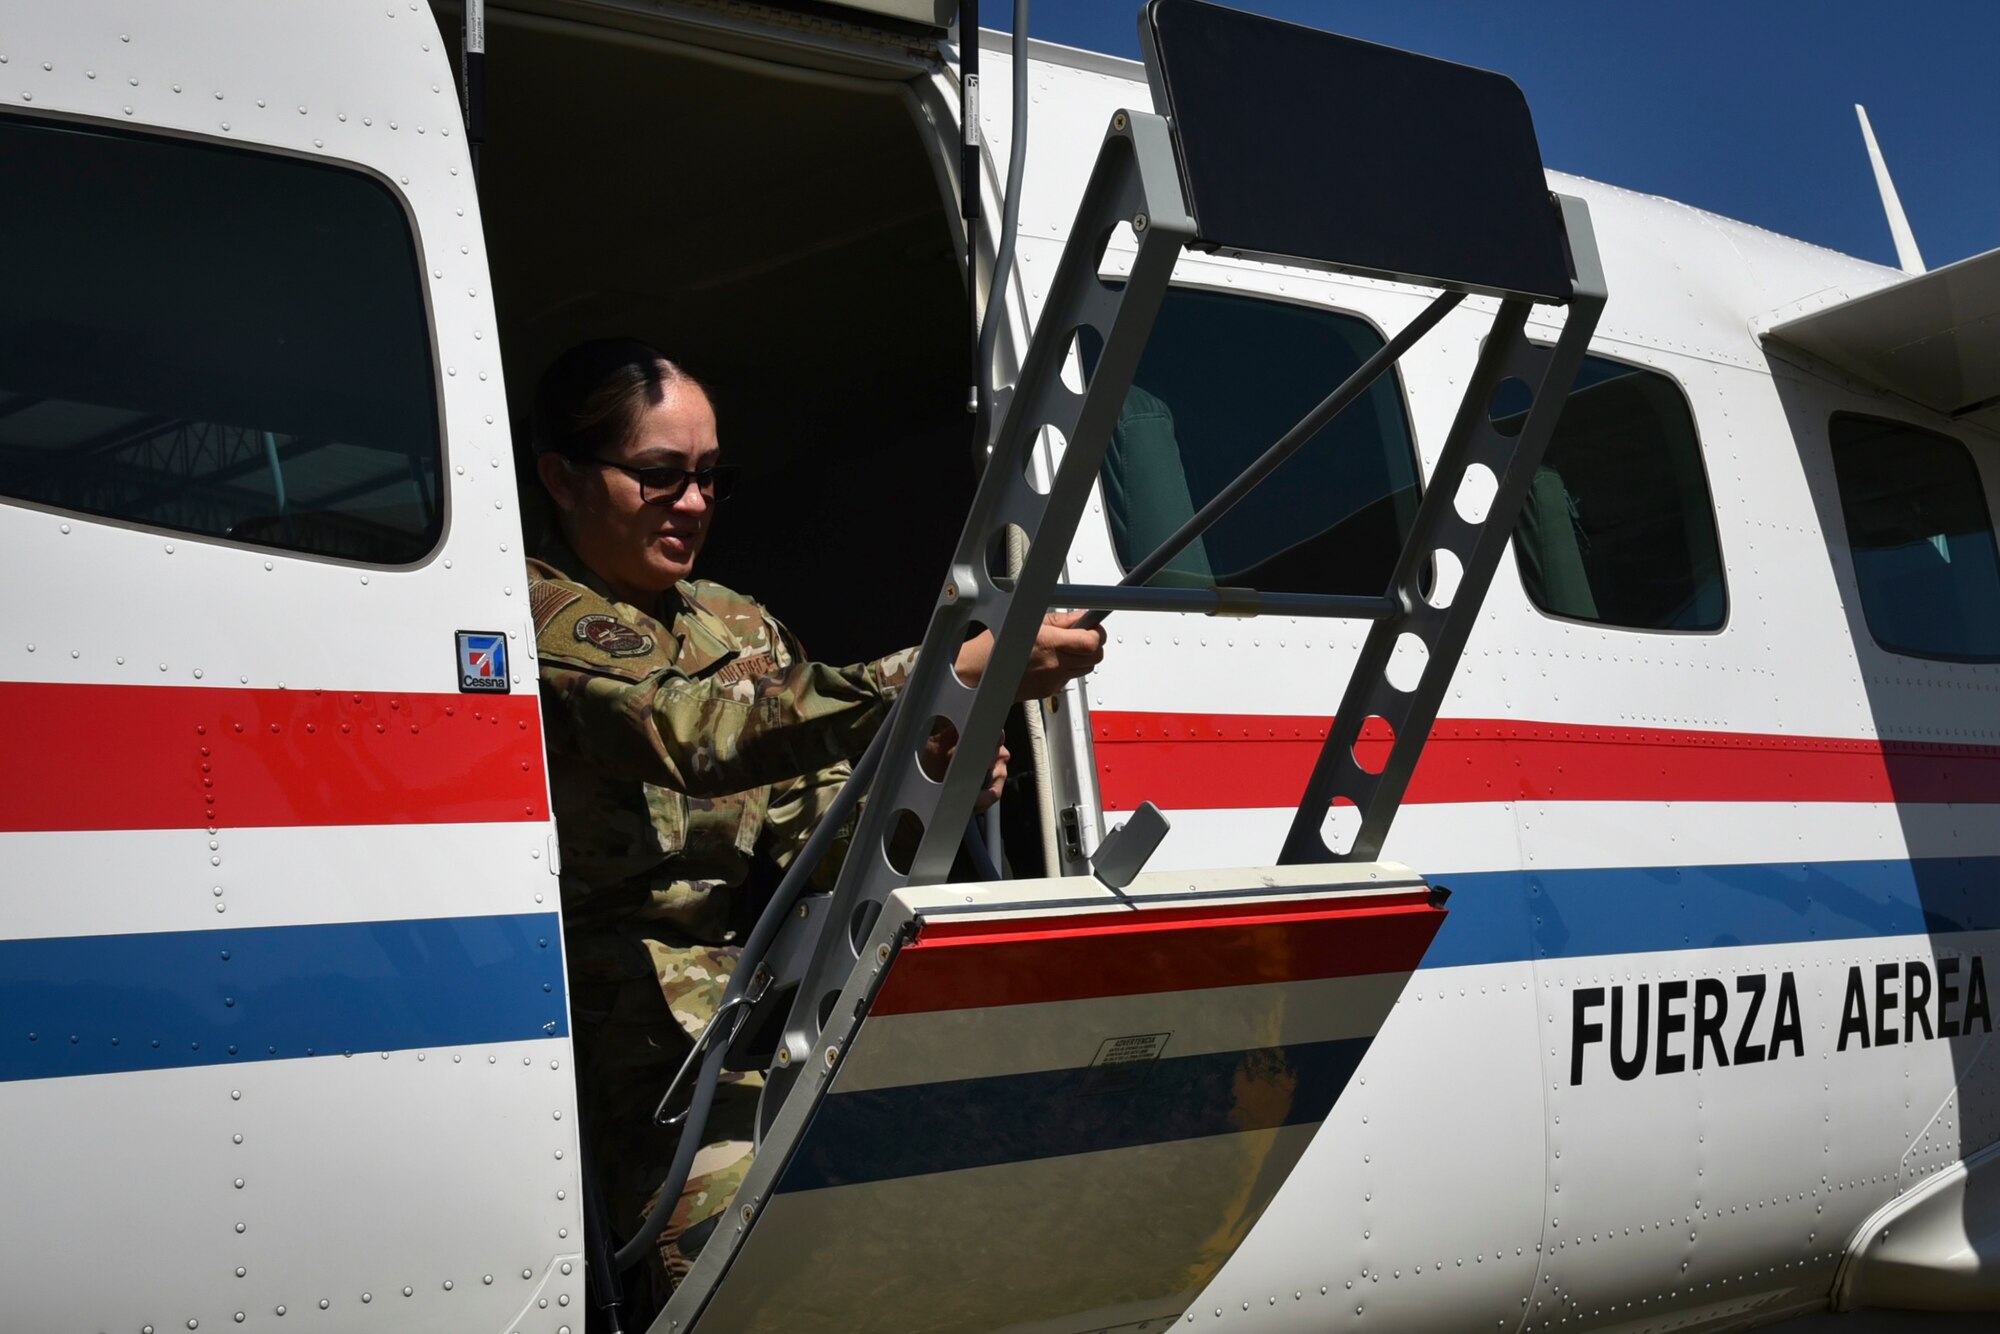 U.S. Air Force Master Sgt. Ana Mendiola, the 571st Mobility Support Advisory Squadron (MSAS) training flight chief, closes the door of a Cessna 402 aircraft, Sept. 15, 2022, in Paraguay. The 571st MSAS visited Paraguay to train their Air Force and build partnership capacity. During their visit, the first flight between the two Air Force units was operated and completed solely by an all-female aircrew and led by a female Paraguayan pilot. (Courtesy Photo)